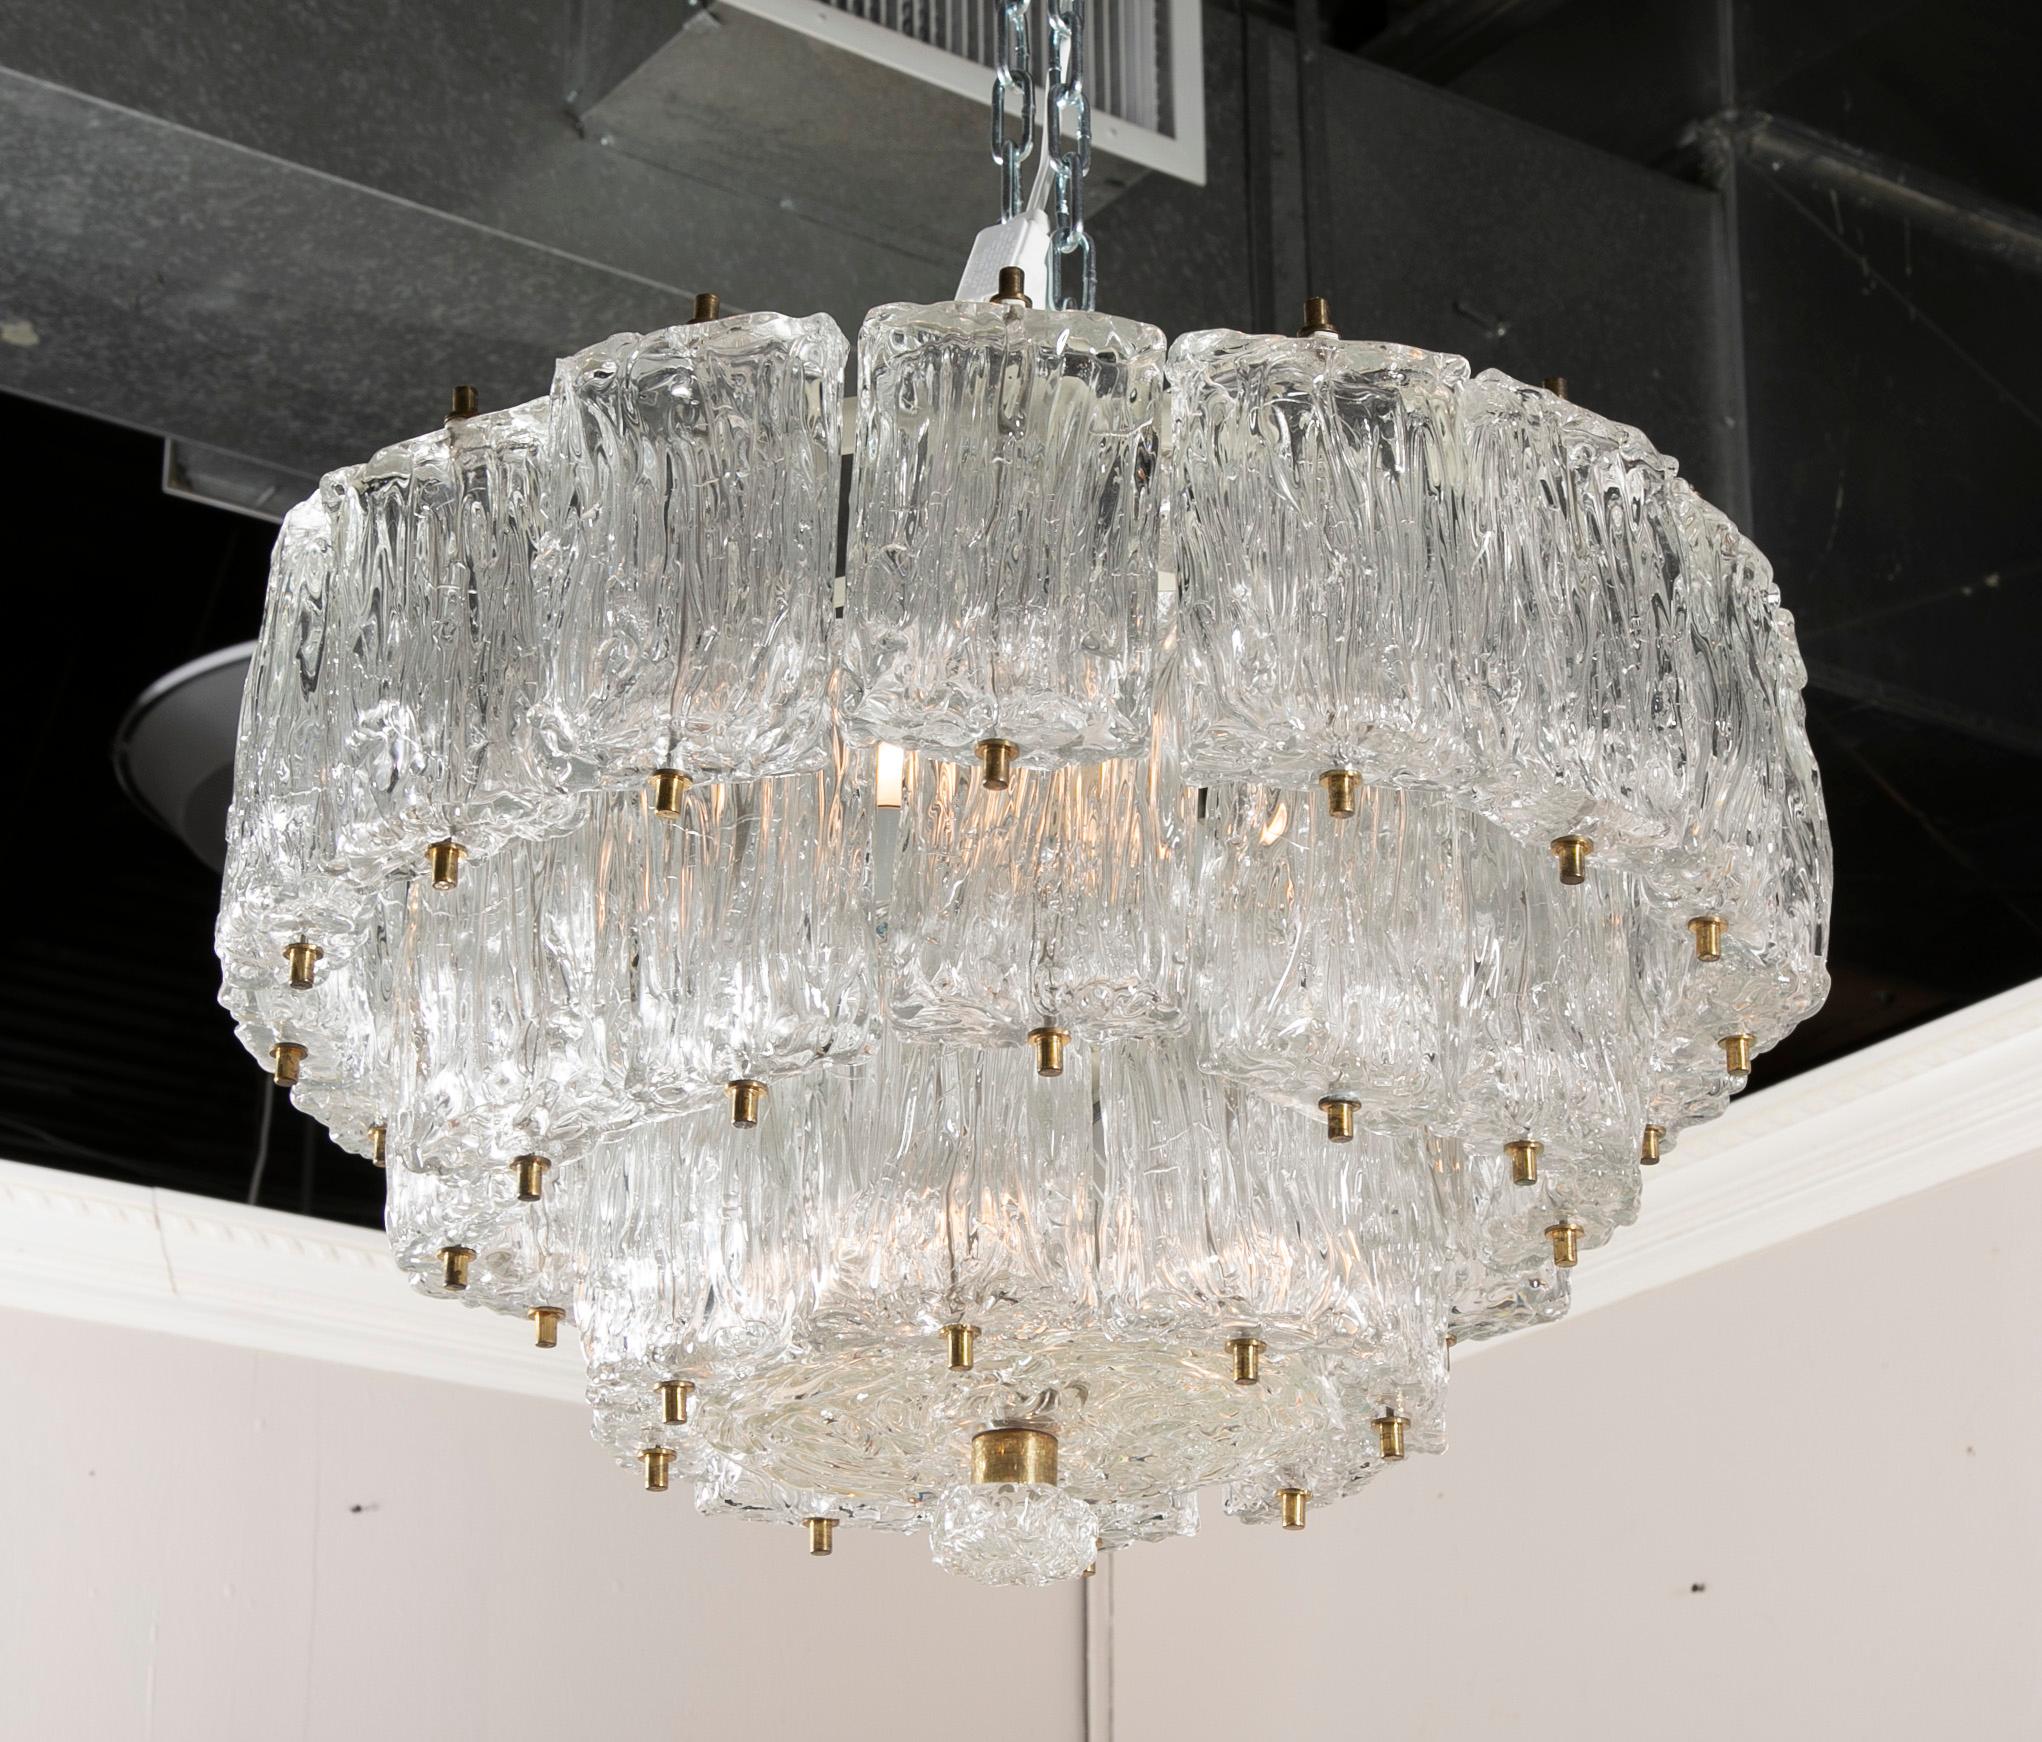 Mid-20th Century Three-Tier Murano Glass Chandelier by Barovier & Toso For Sale